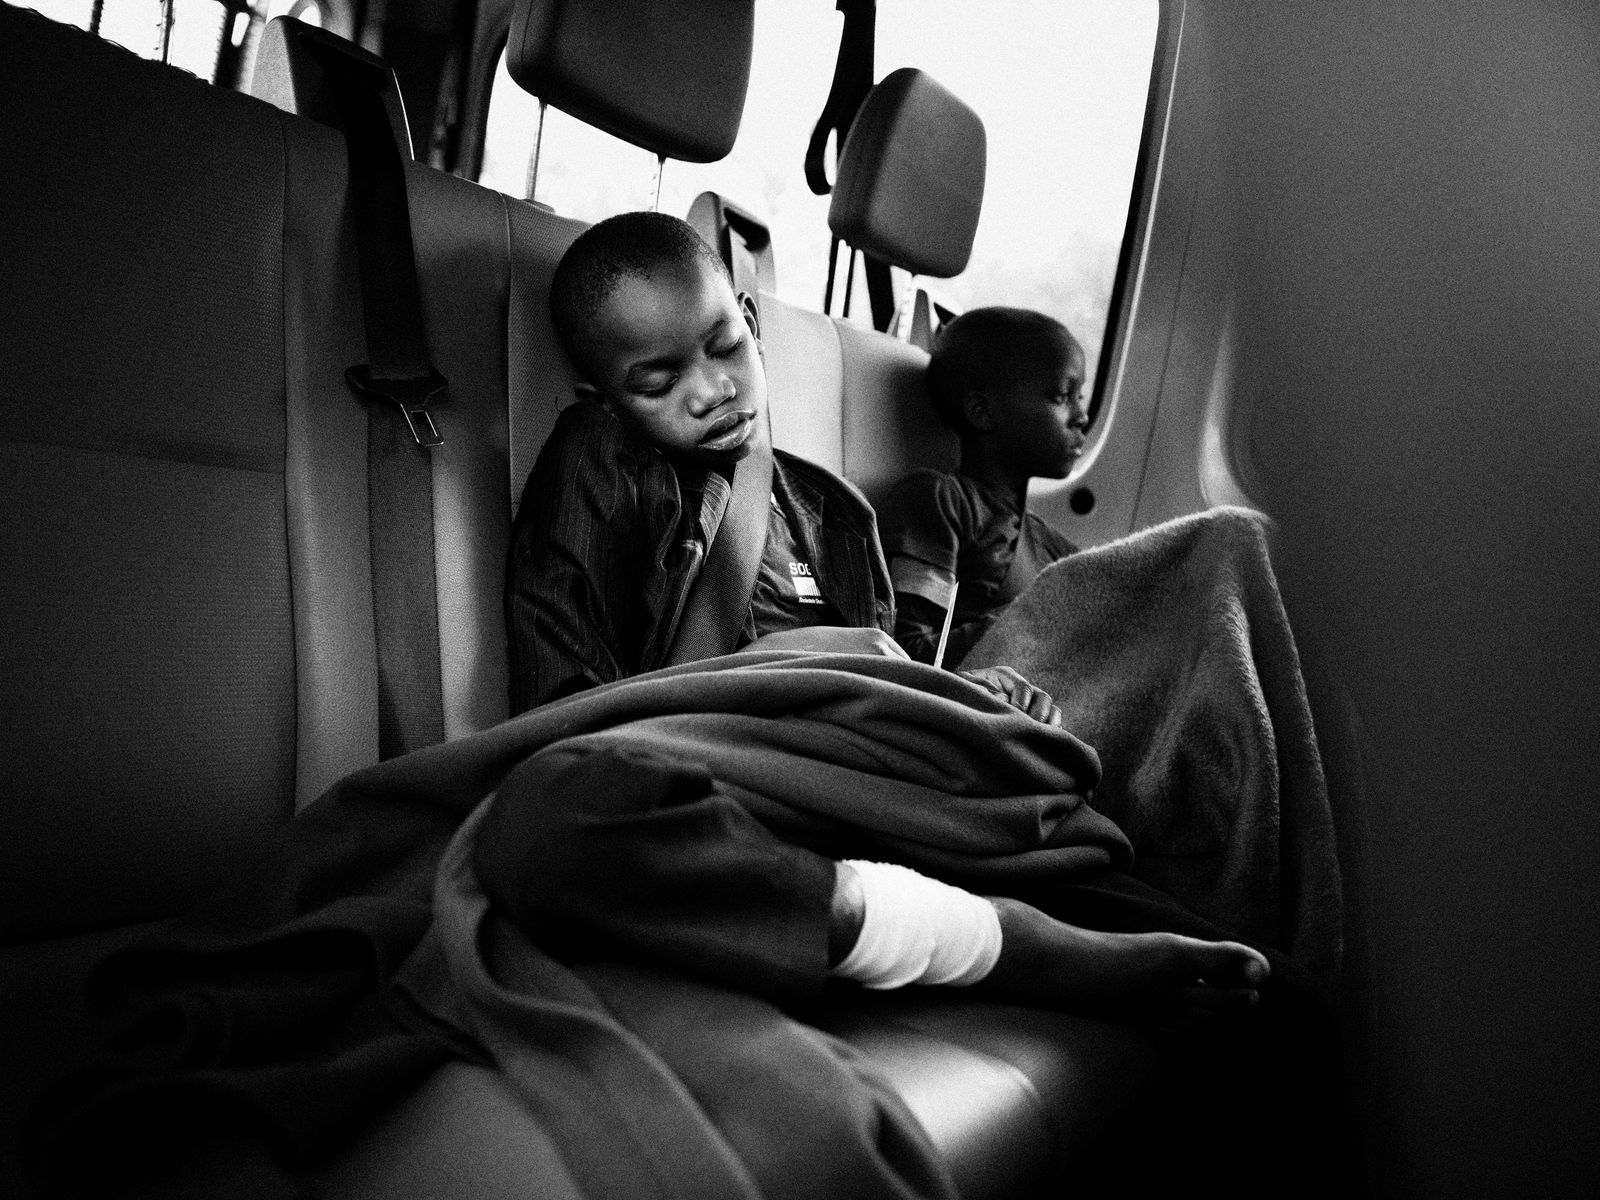 © Toby Binder - Image from the Children of War photography project